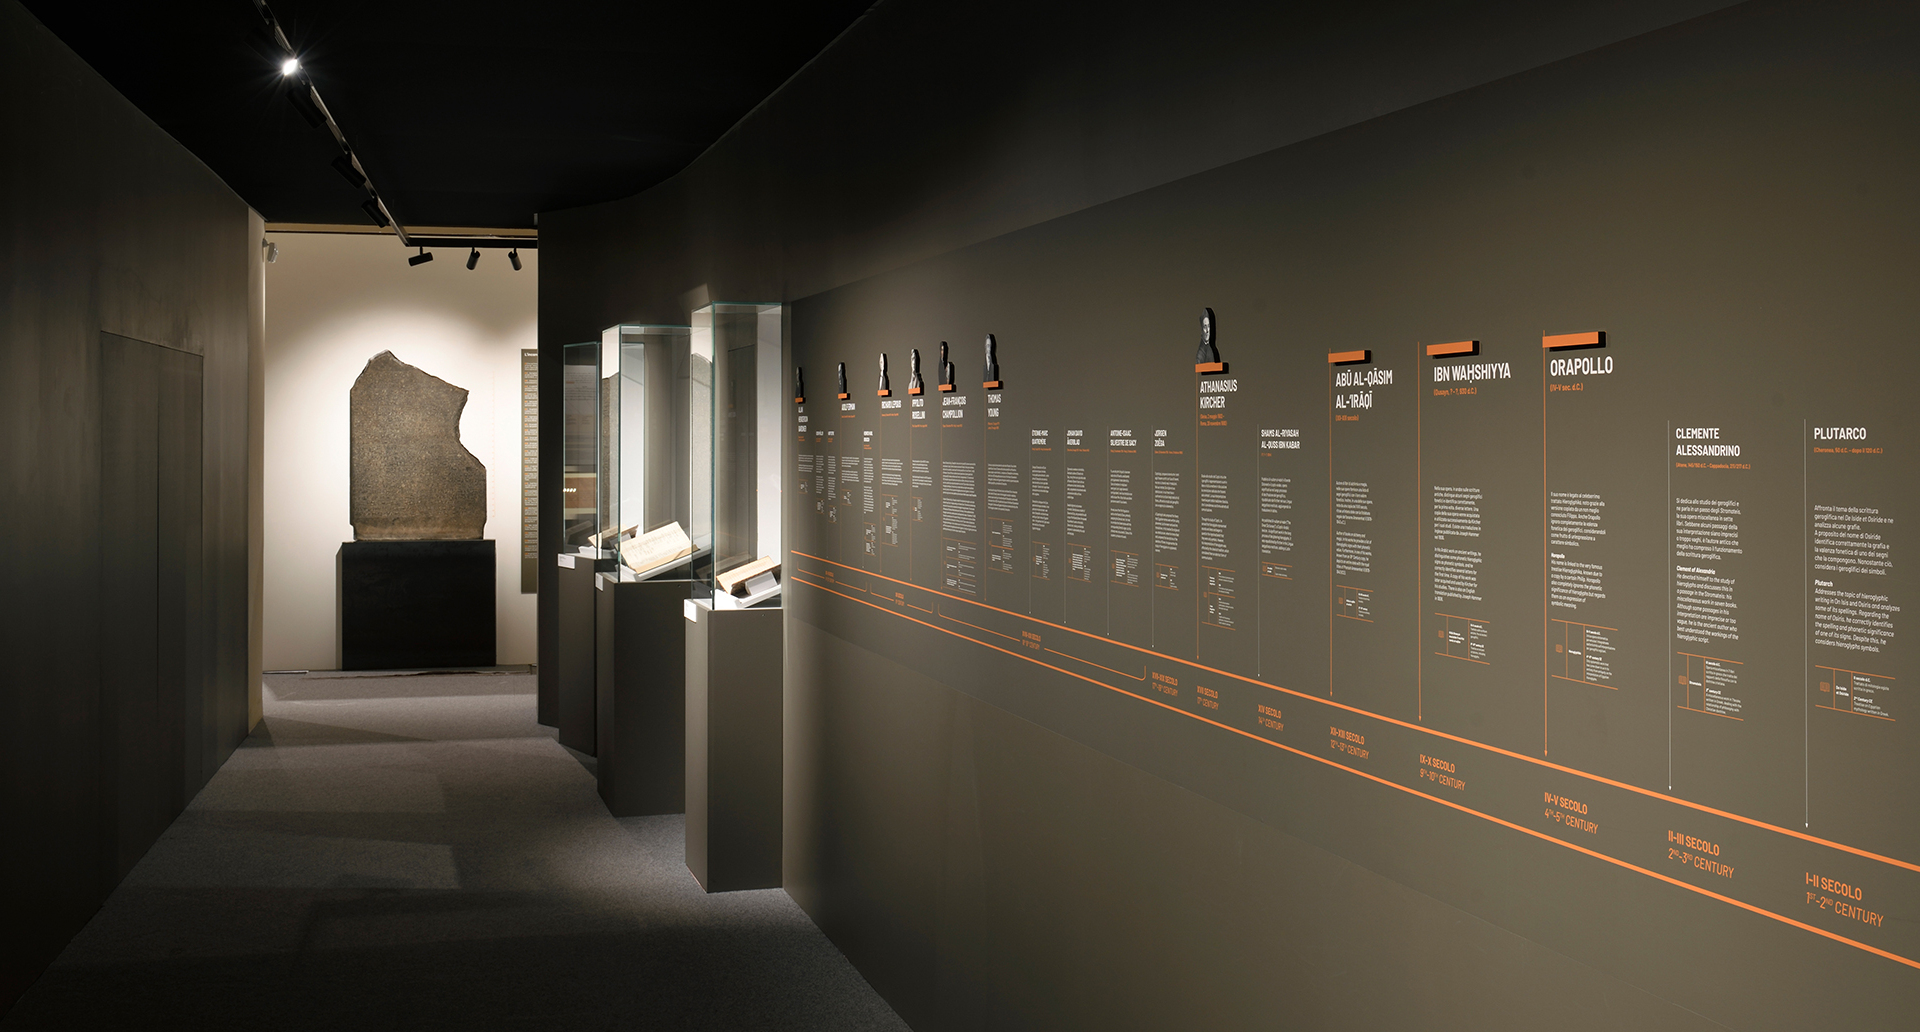 Image of a passageway in the Egyptian Museum with installed A.24 and Vector